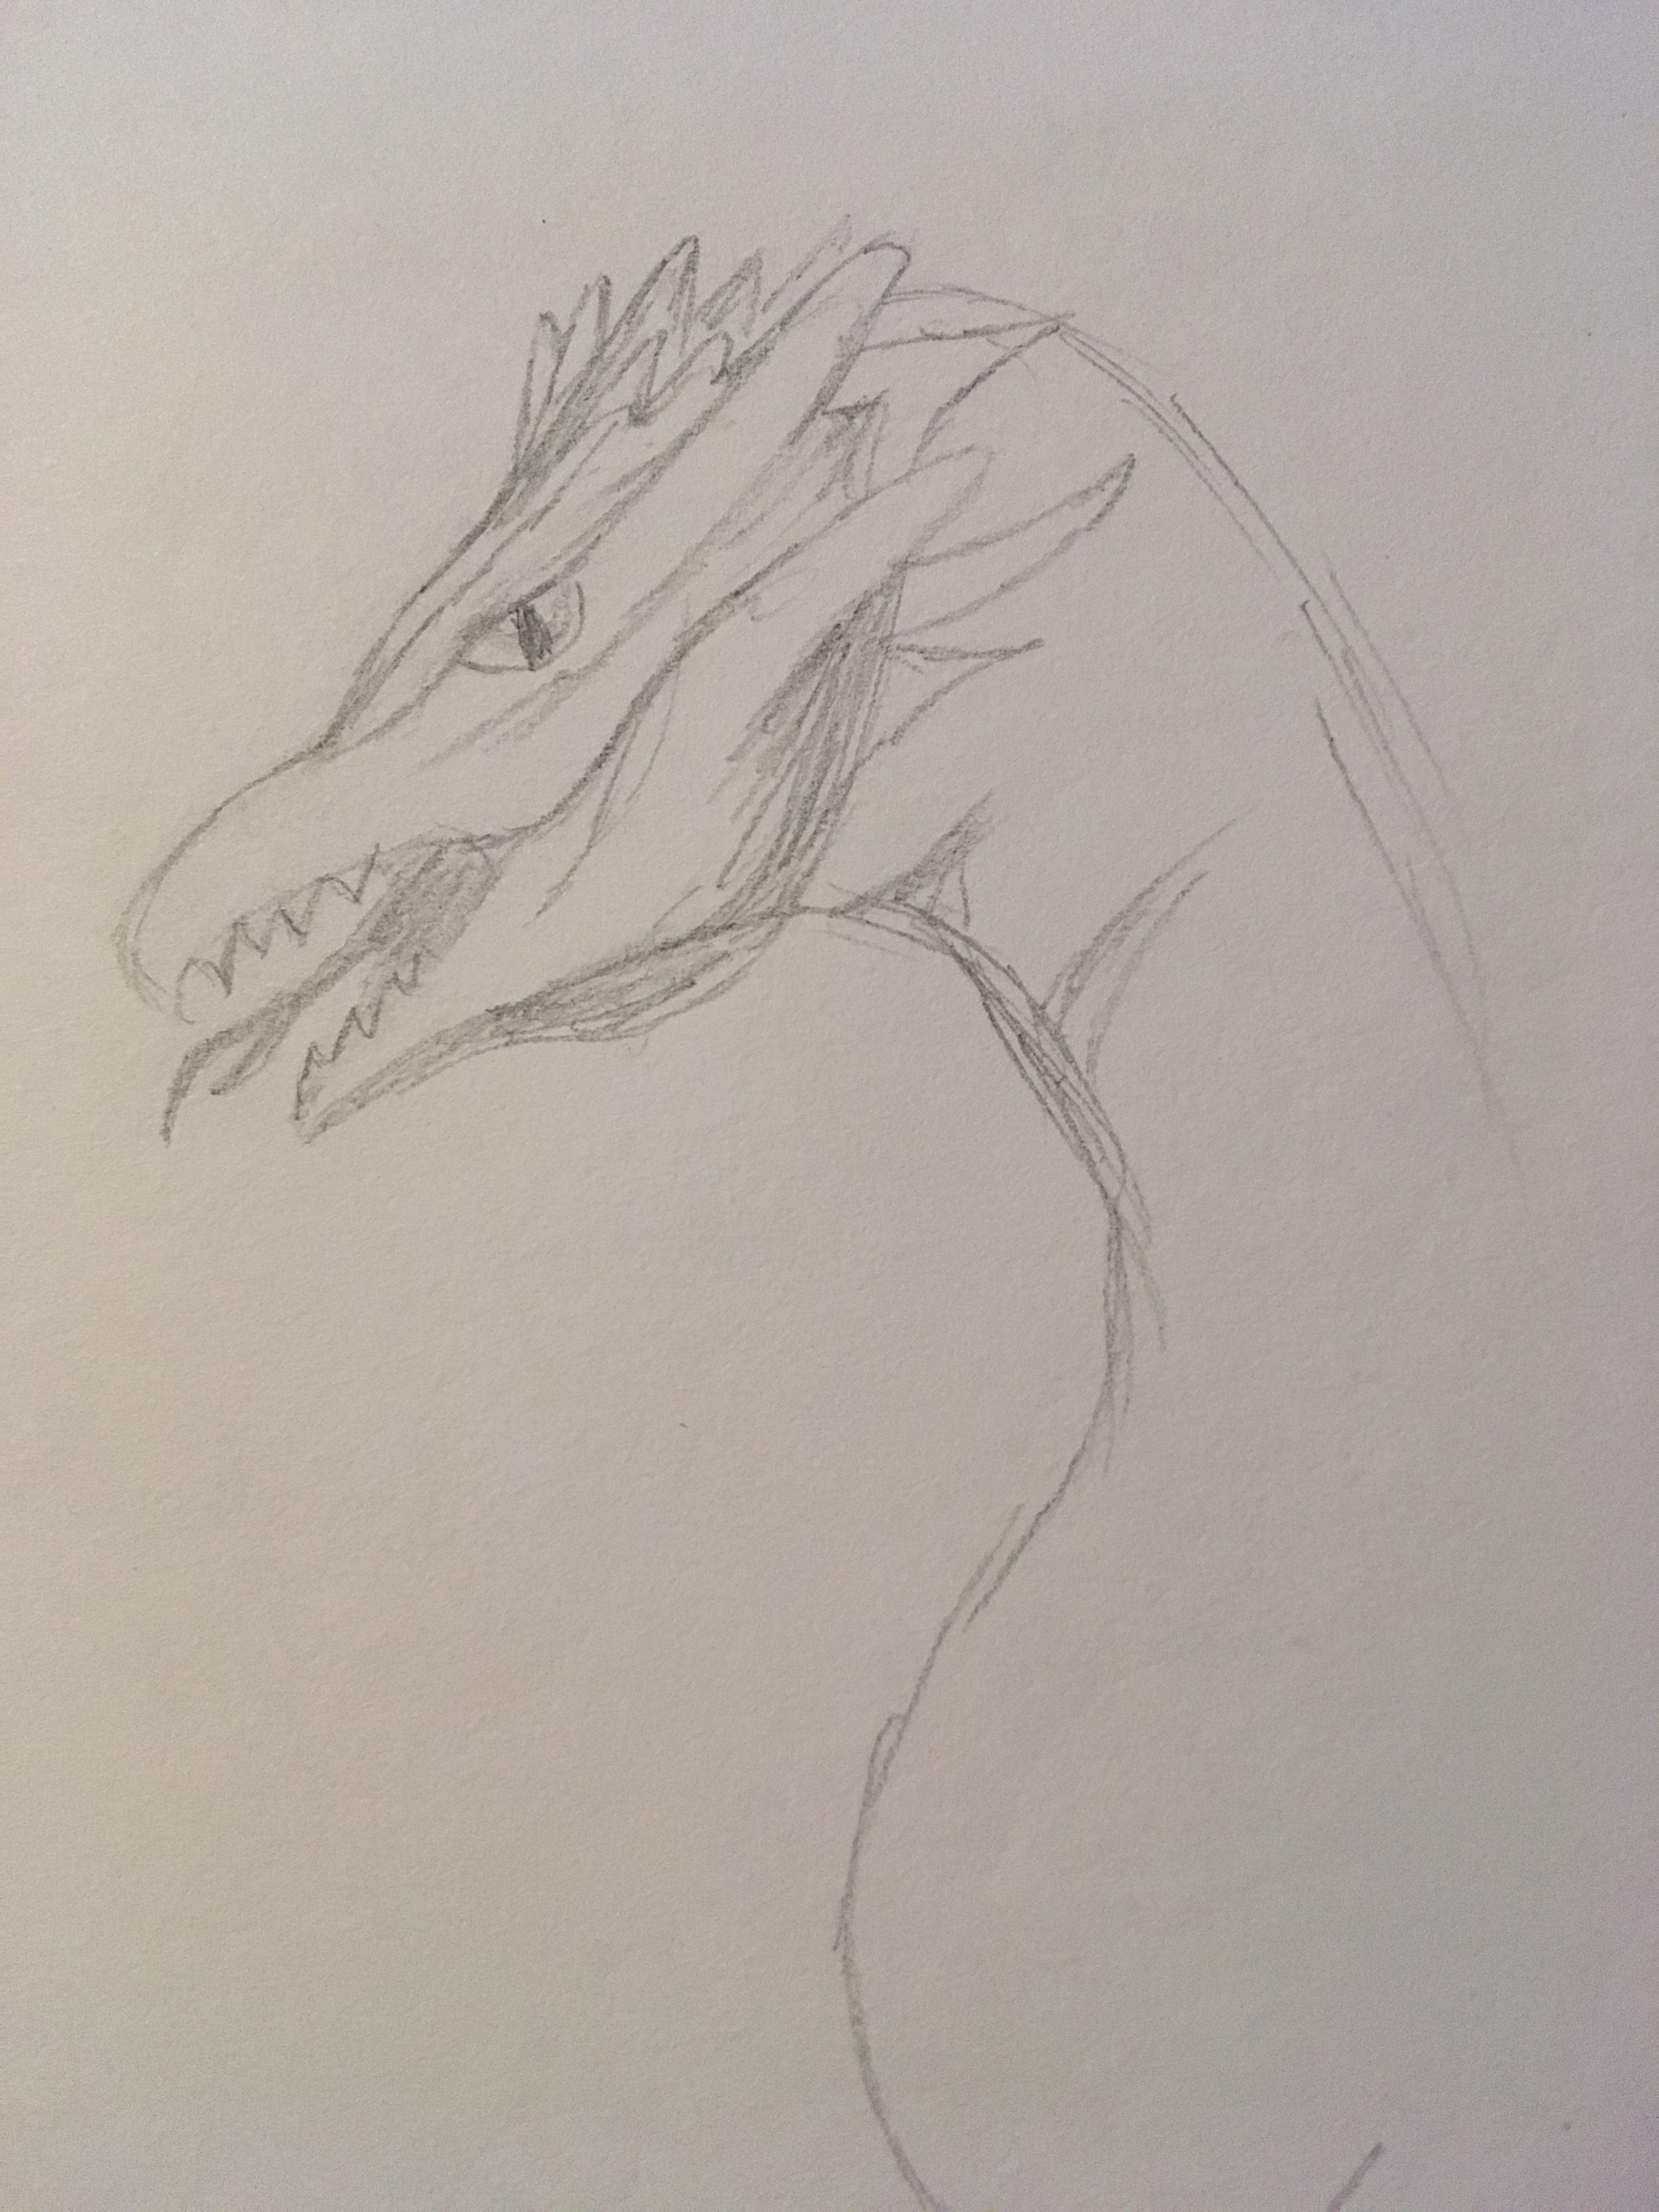 a rough sketch of a dragon head, may be fierce